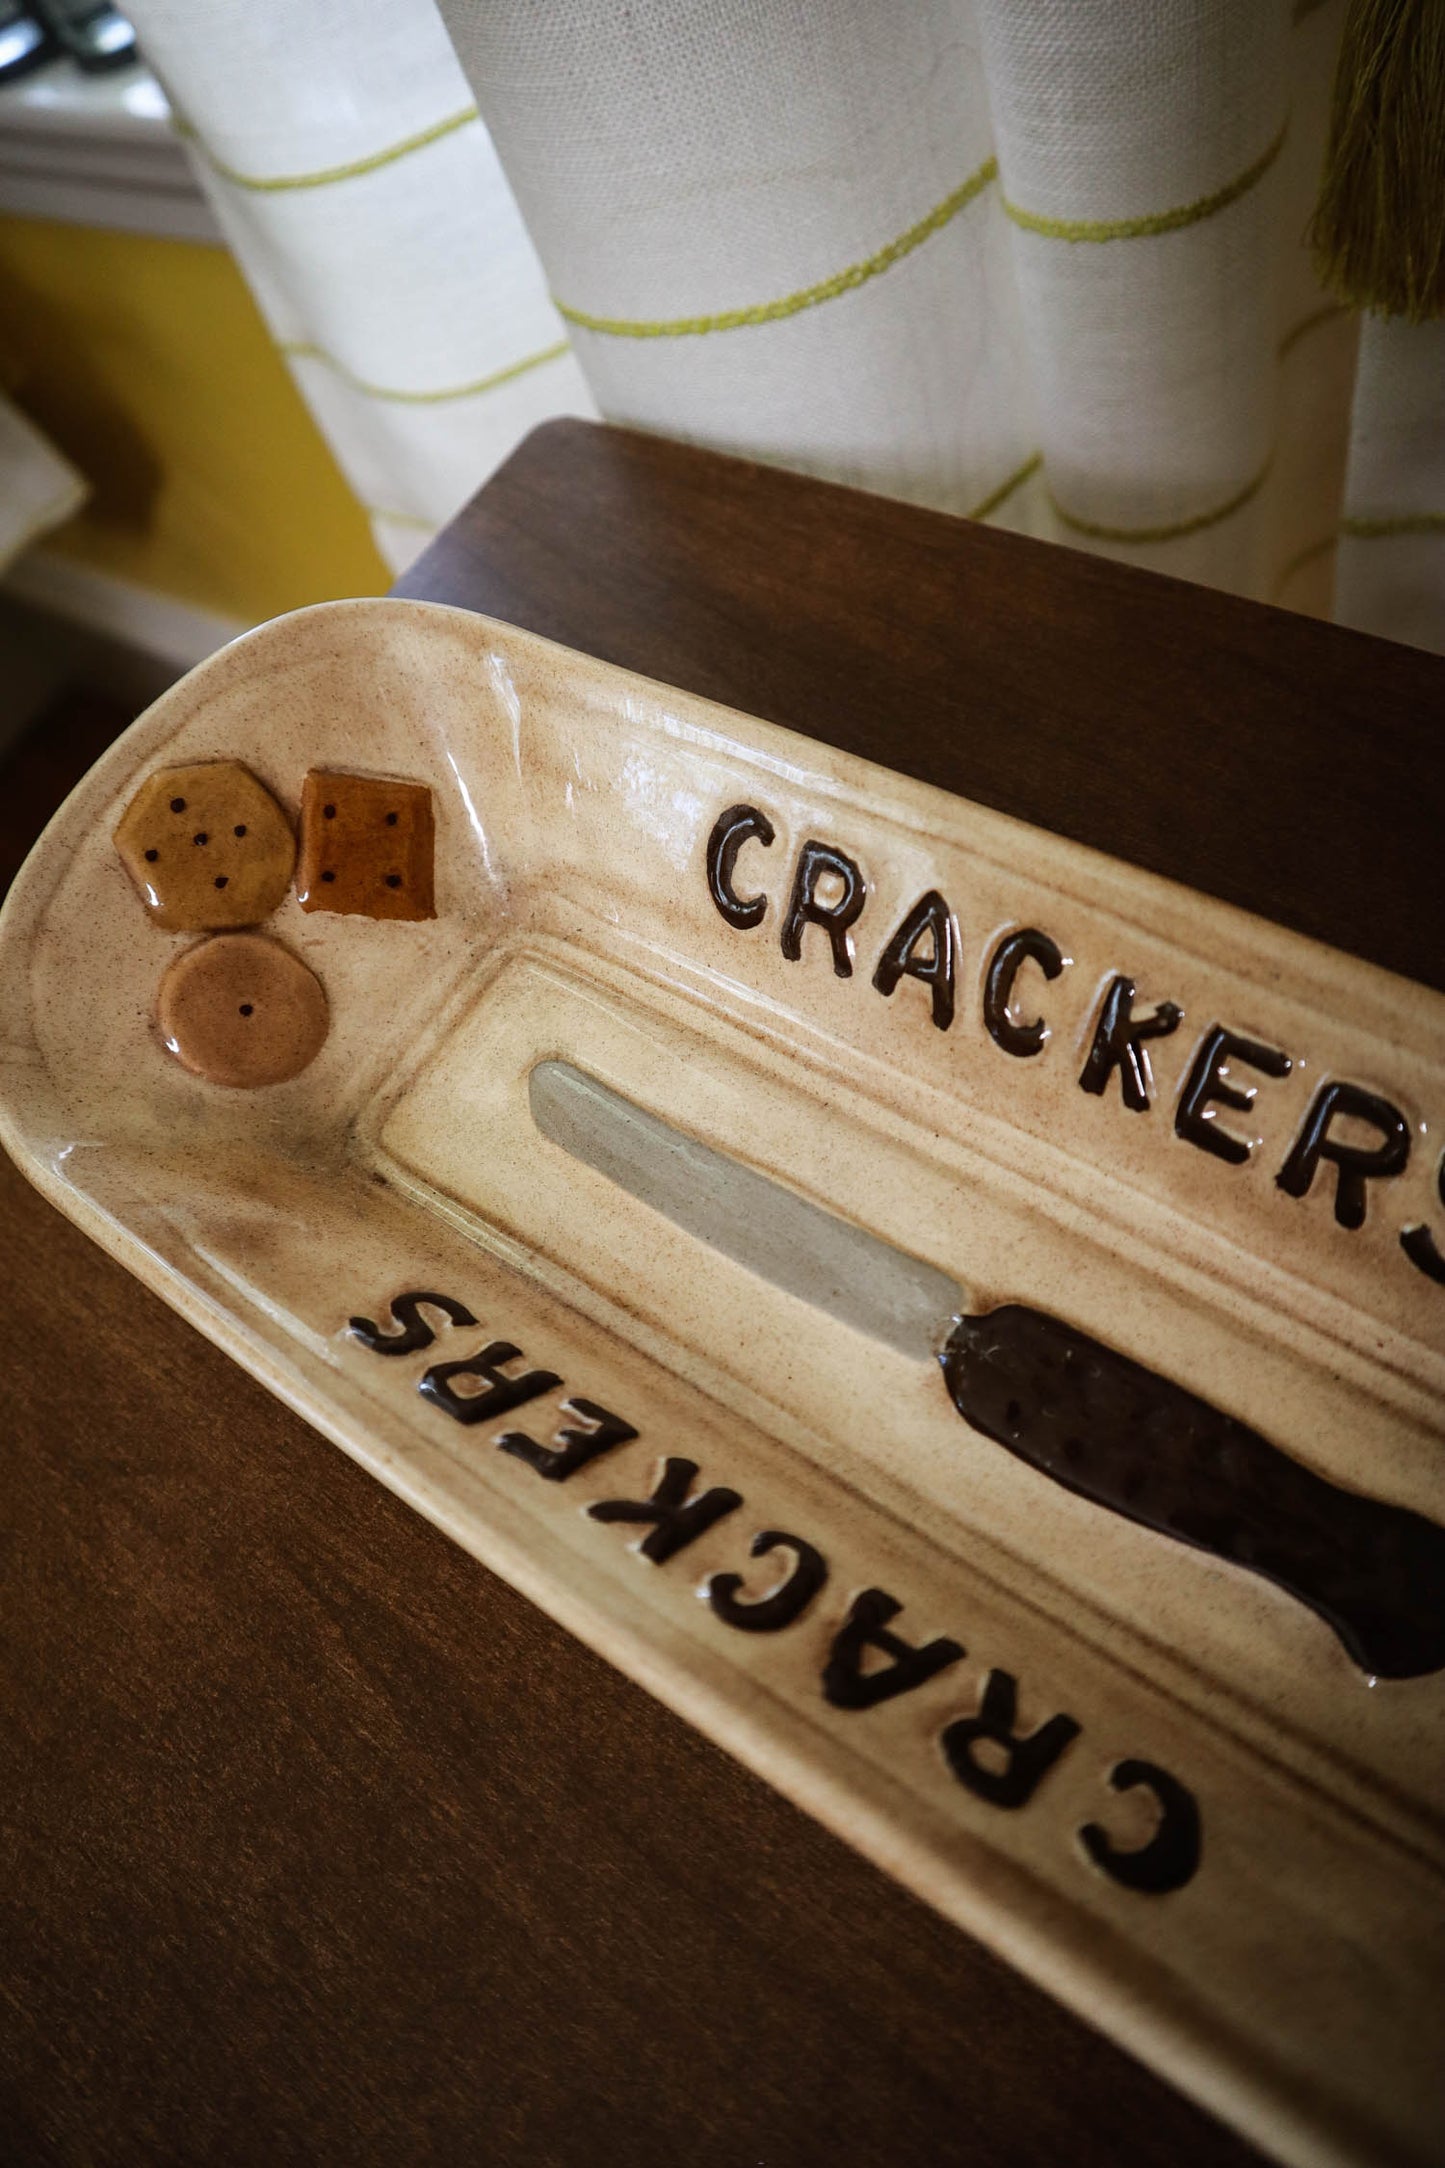 A Tray for Crackers